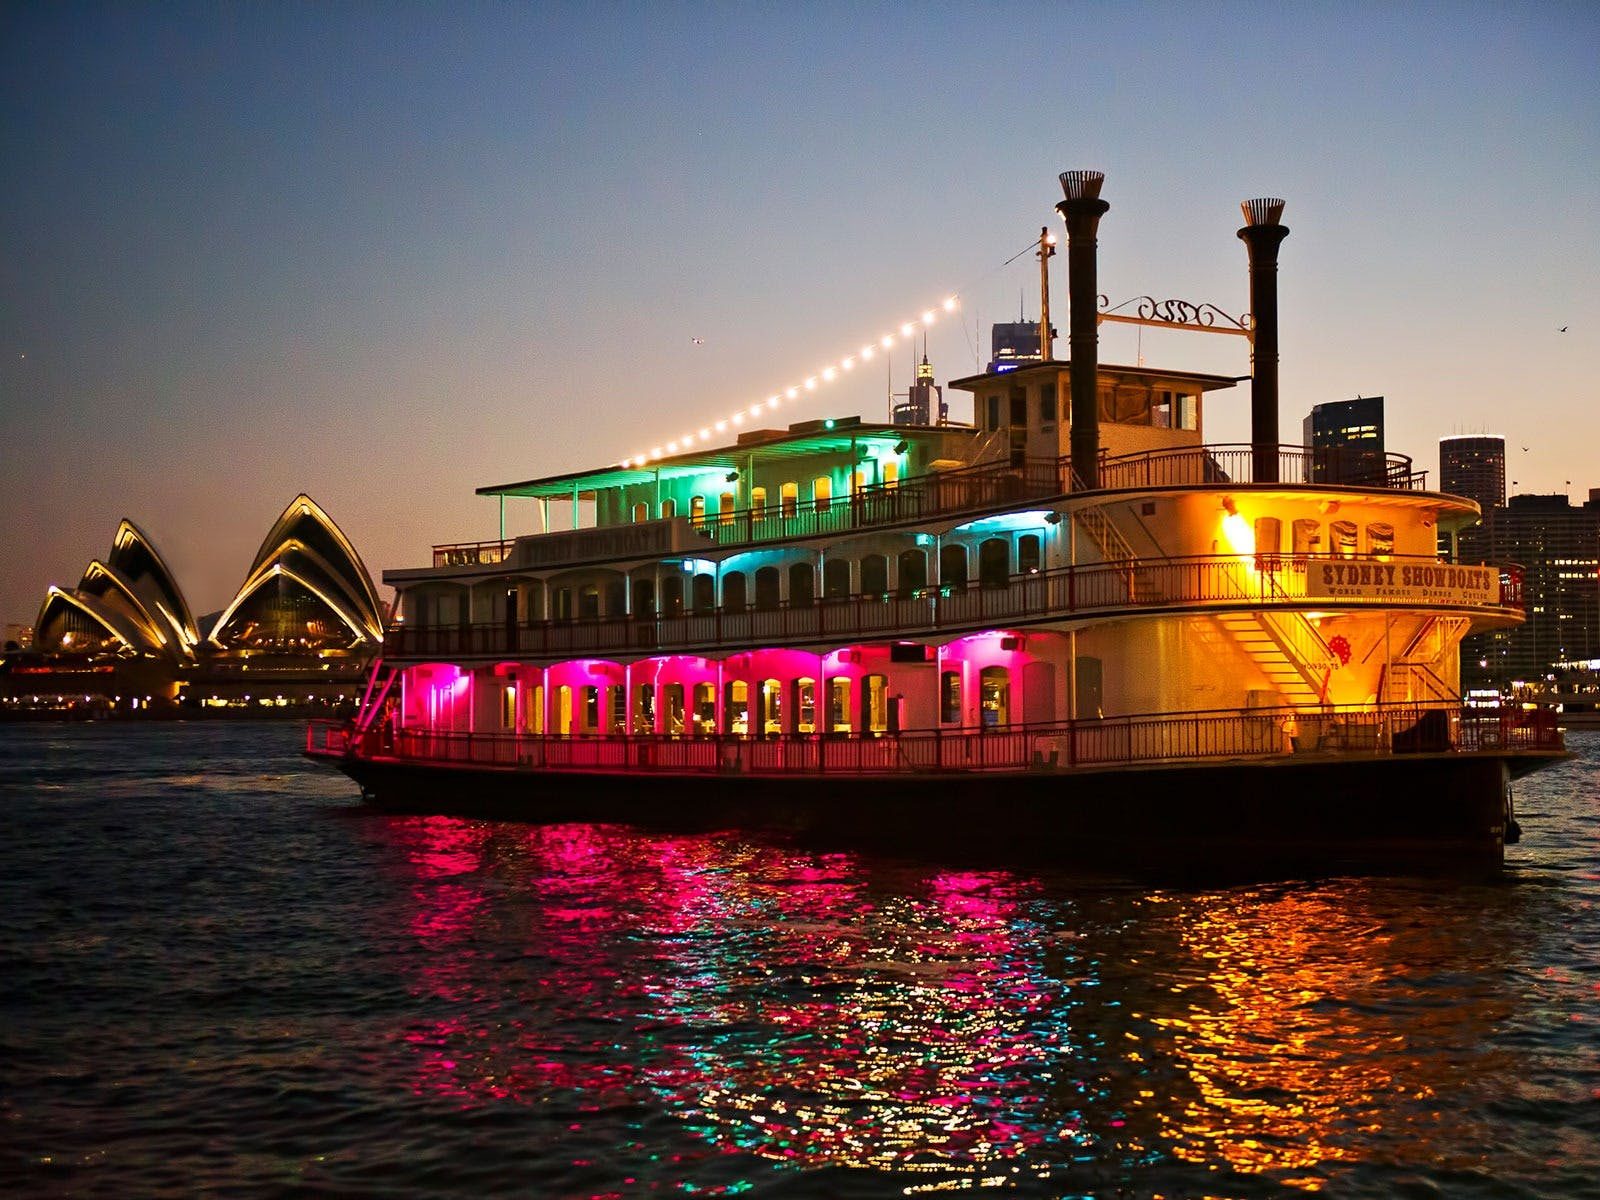 Vessel lit up on the harbour with Opera house in the background